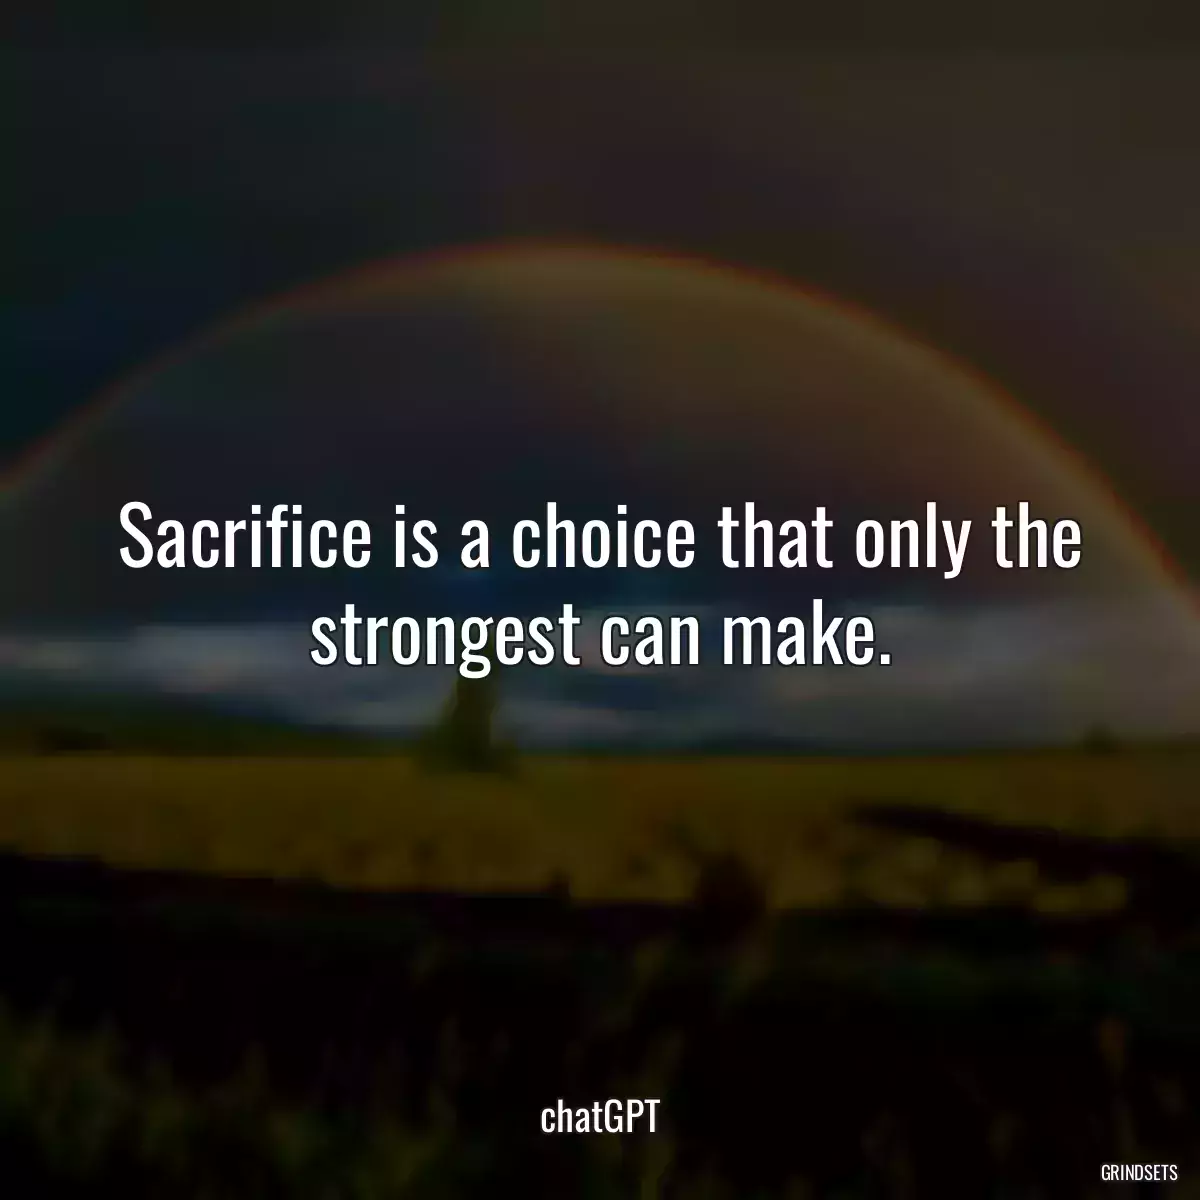 Sacrifice is a choice that only the strongest can make.